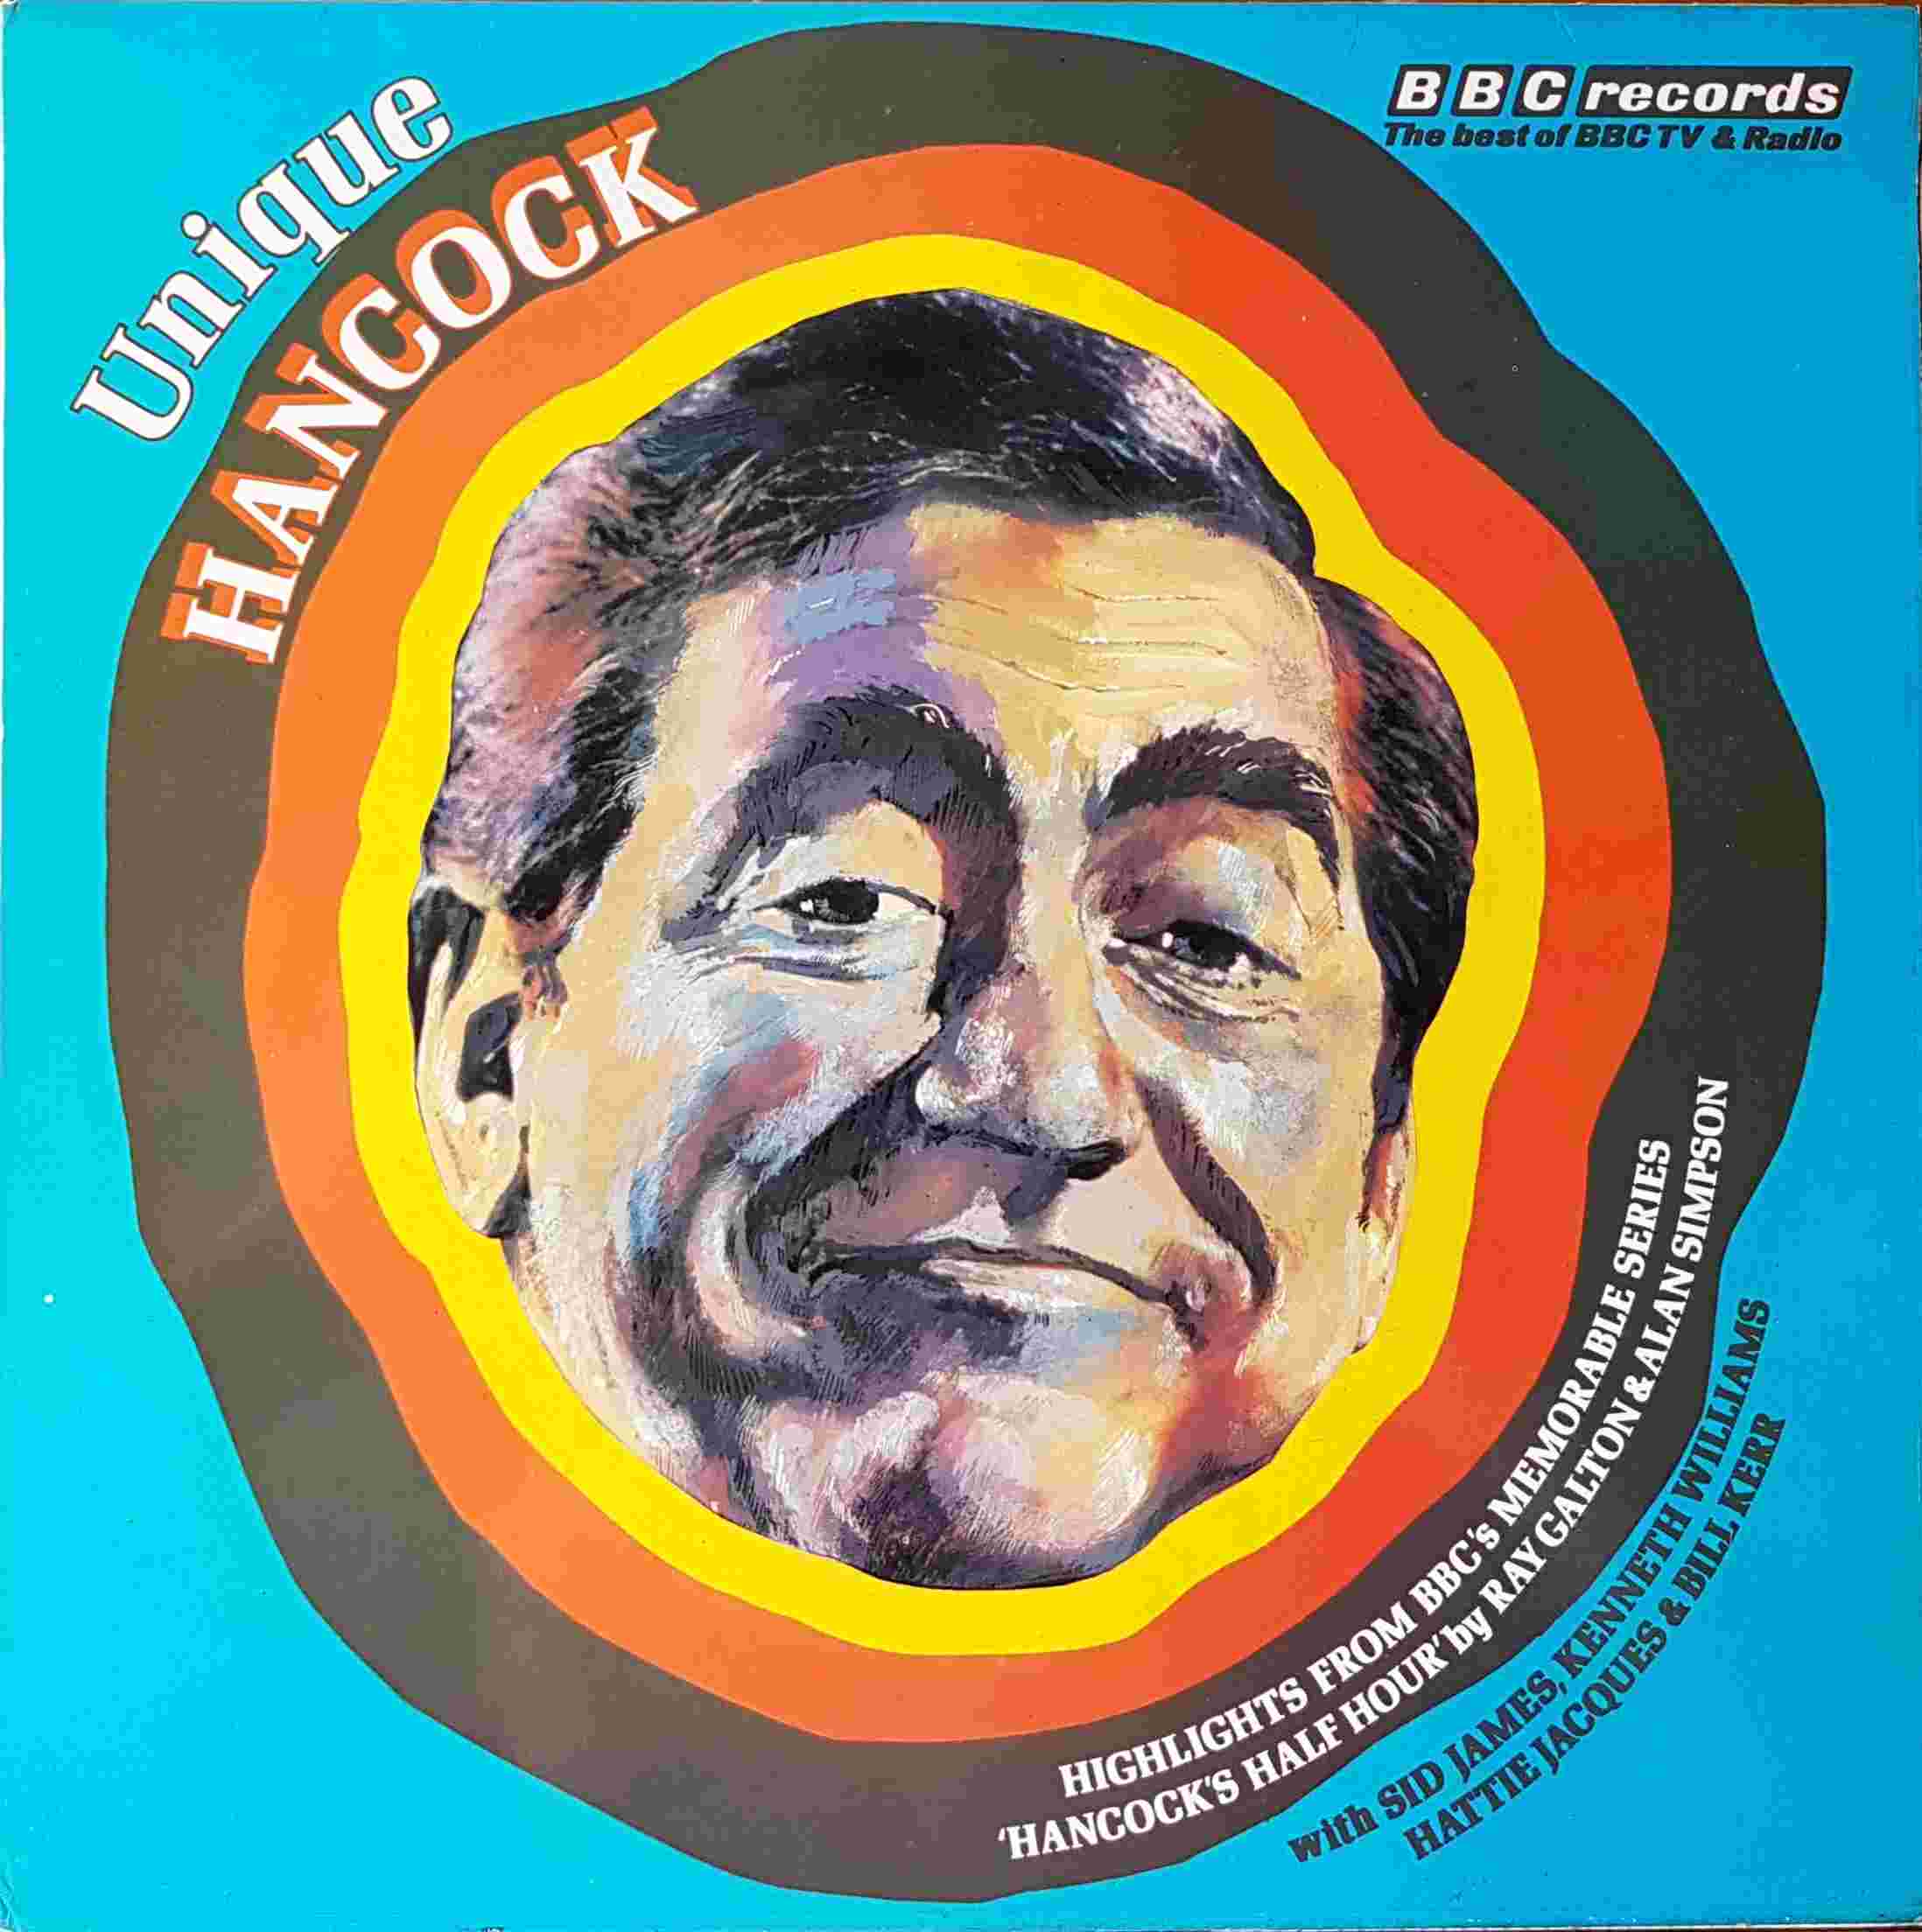 Picture of REB 150 Unique Hancock by artist Tony Hancock from the BBC albums - Records and Tapes library